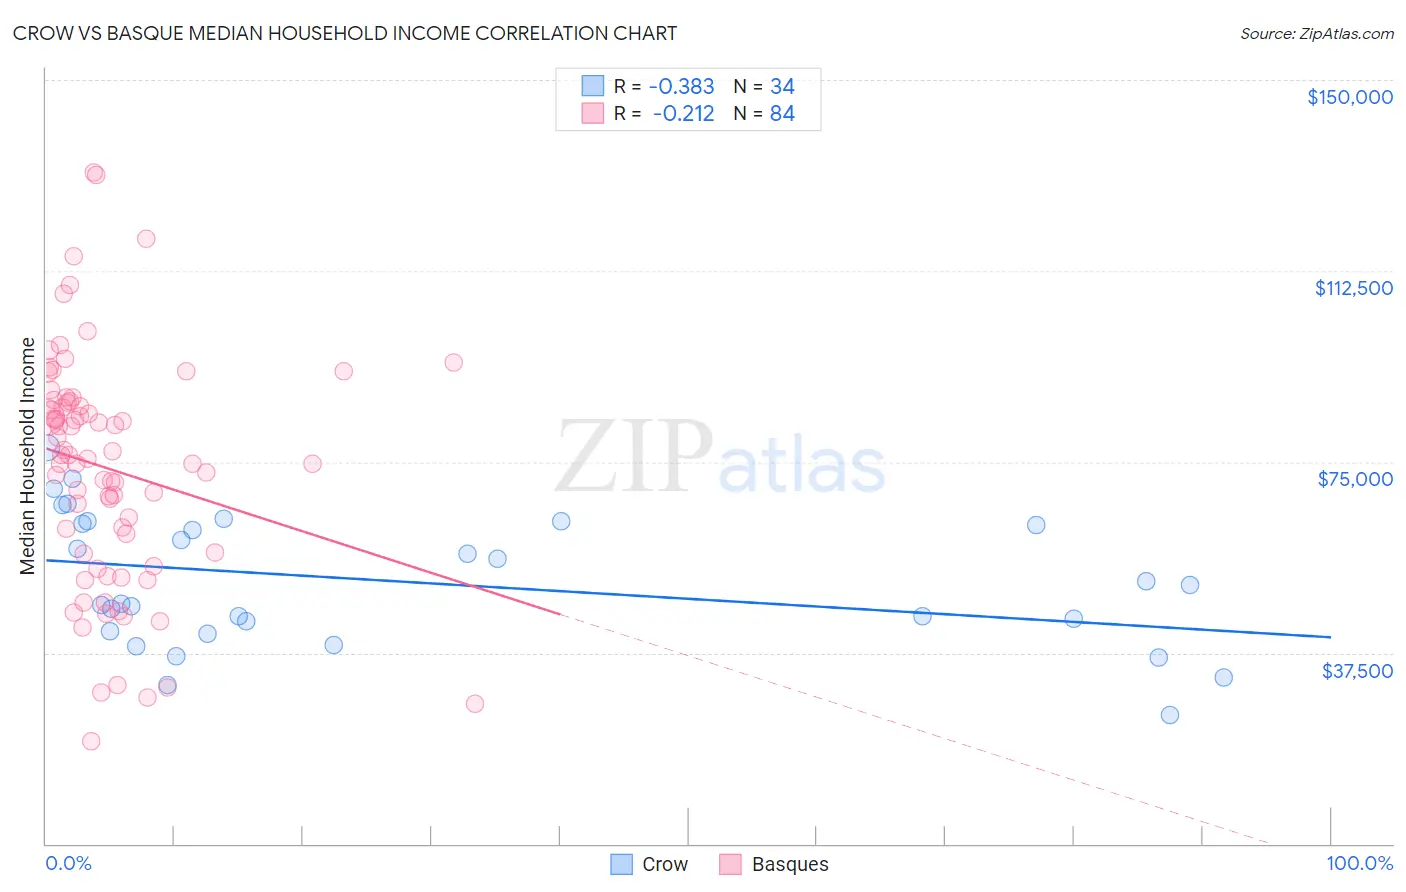 Crow vs Basque Median Household Income